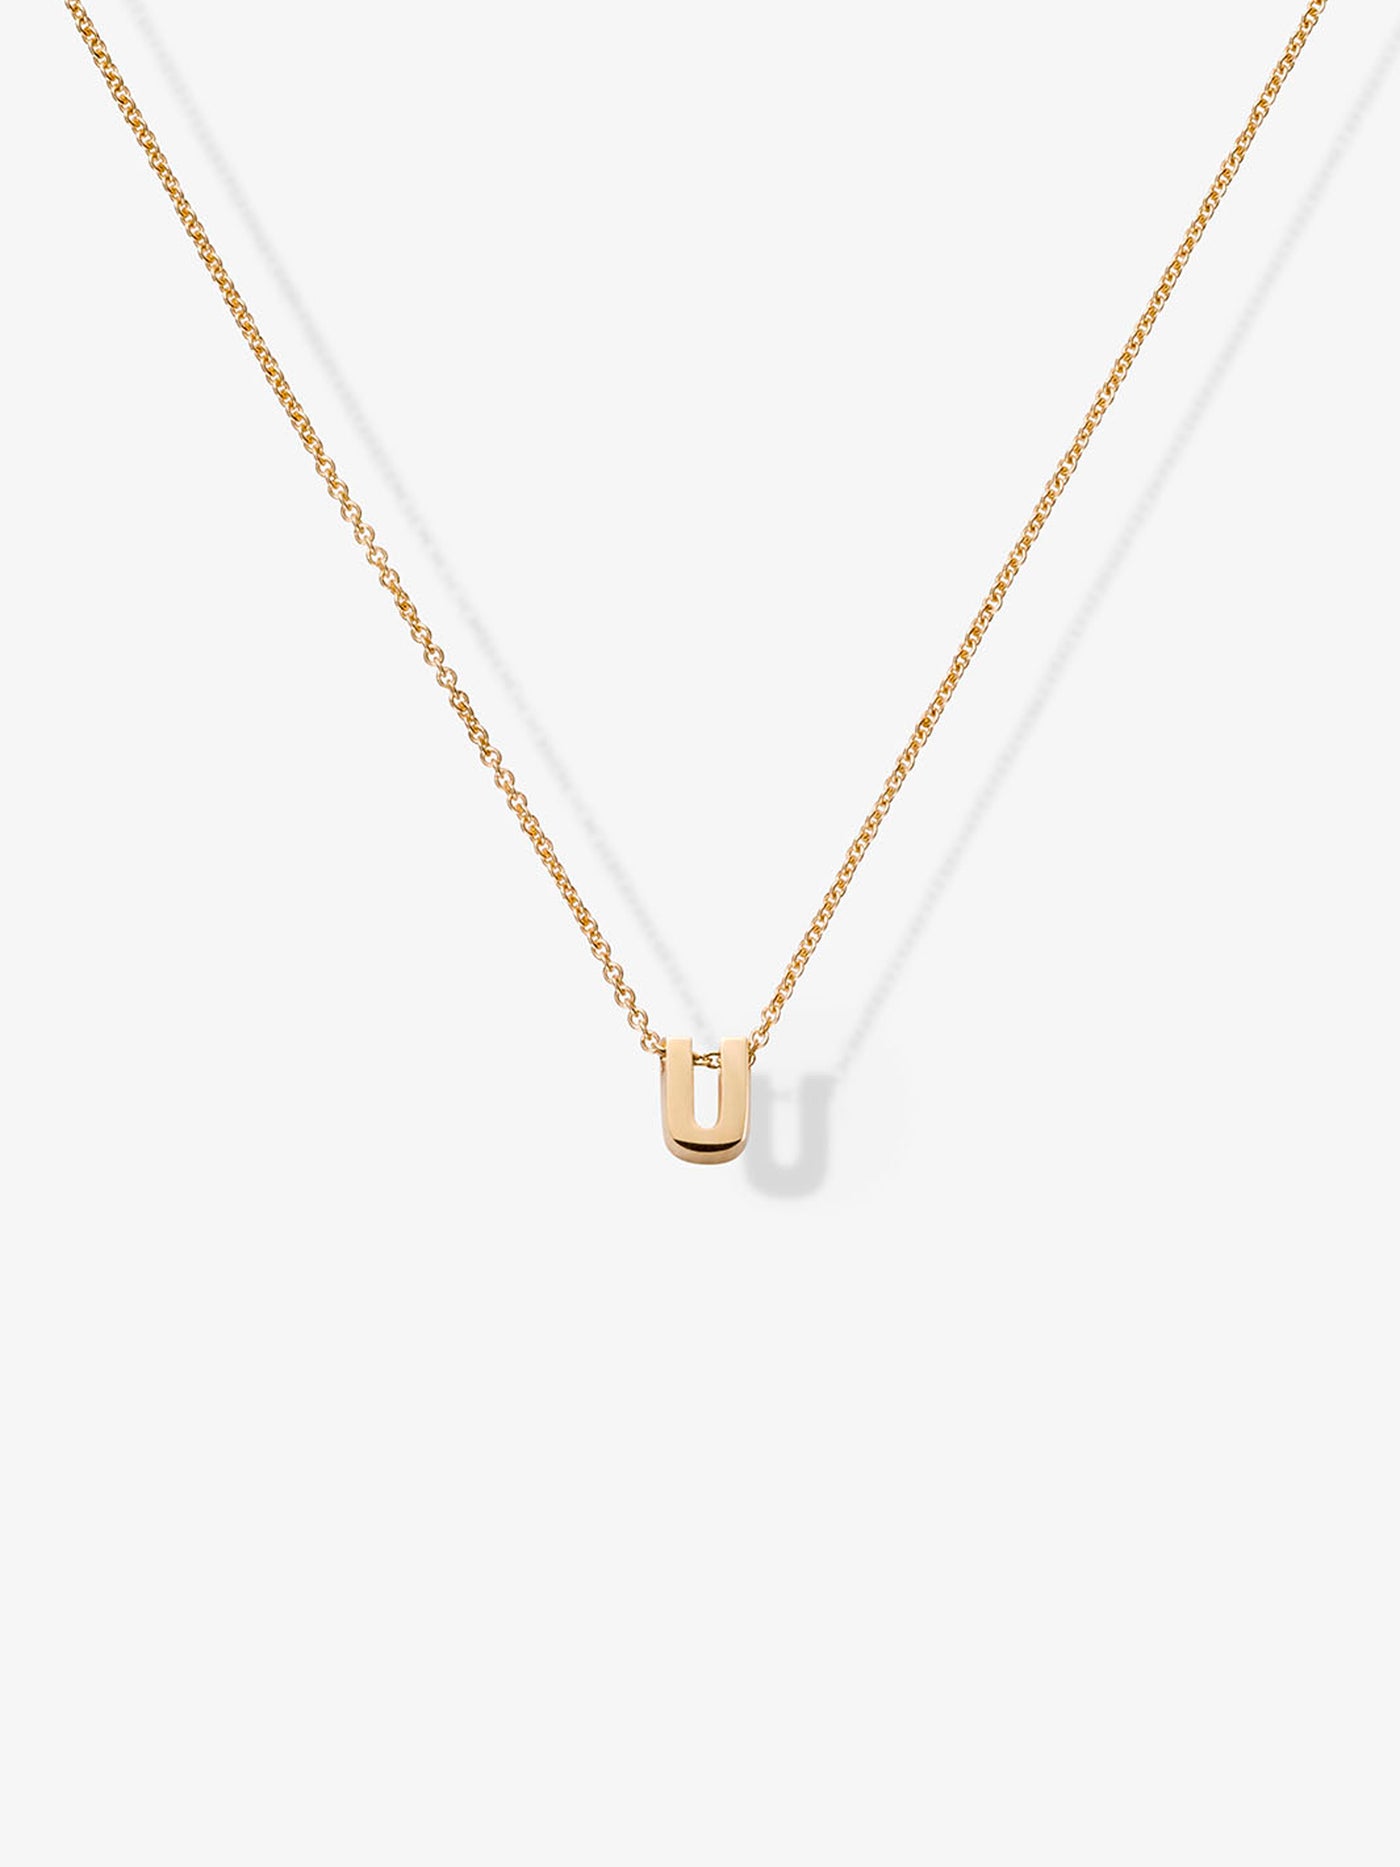 One Letter Necklace in 18k Gold